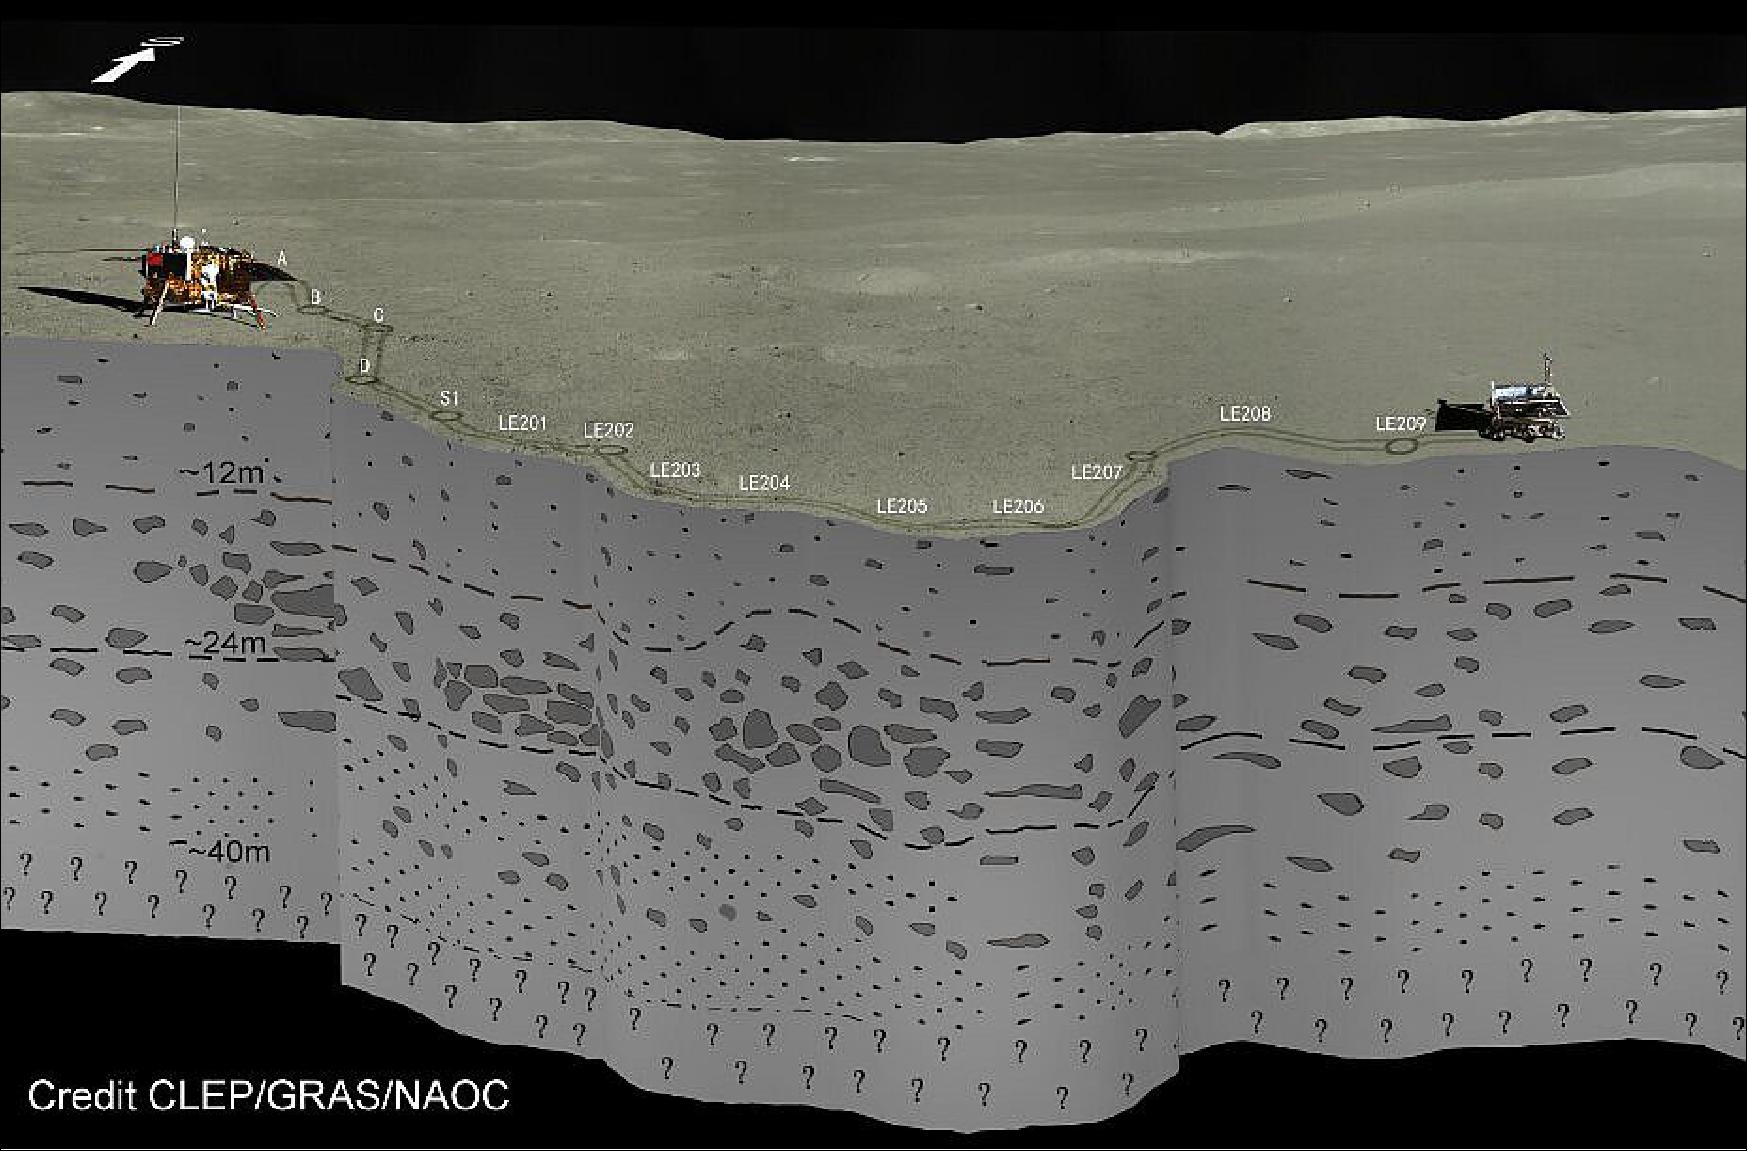 Figure 17: The subsurface stratigraphy seen by Yutu-2 radar on the farside of the moon (image credit: CLEP/CRAS/NAOC)